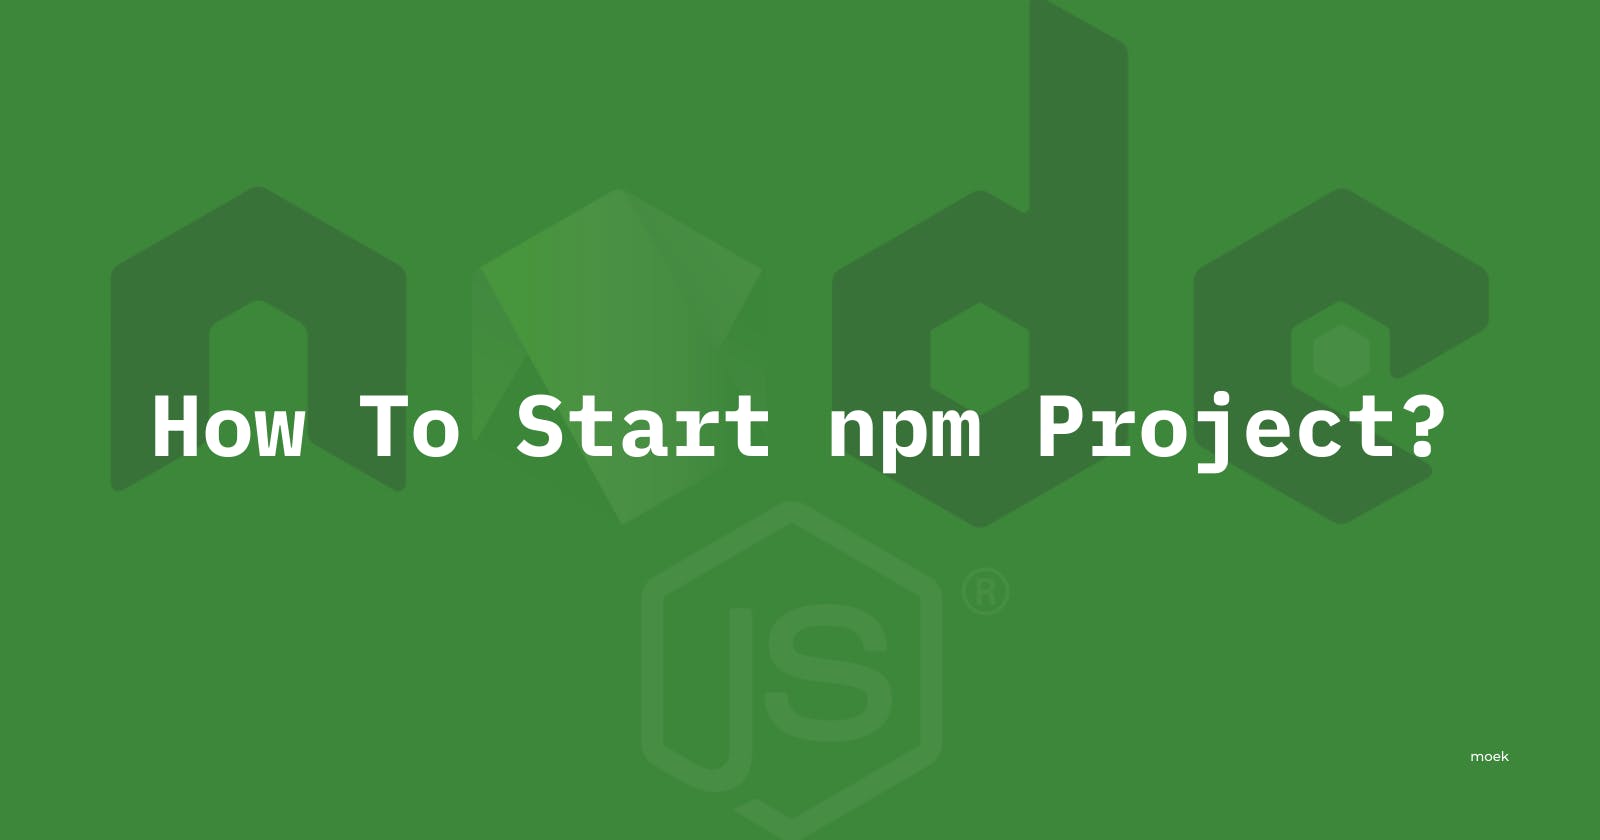 How To Start npm Project?